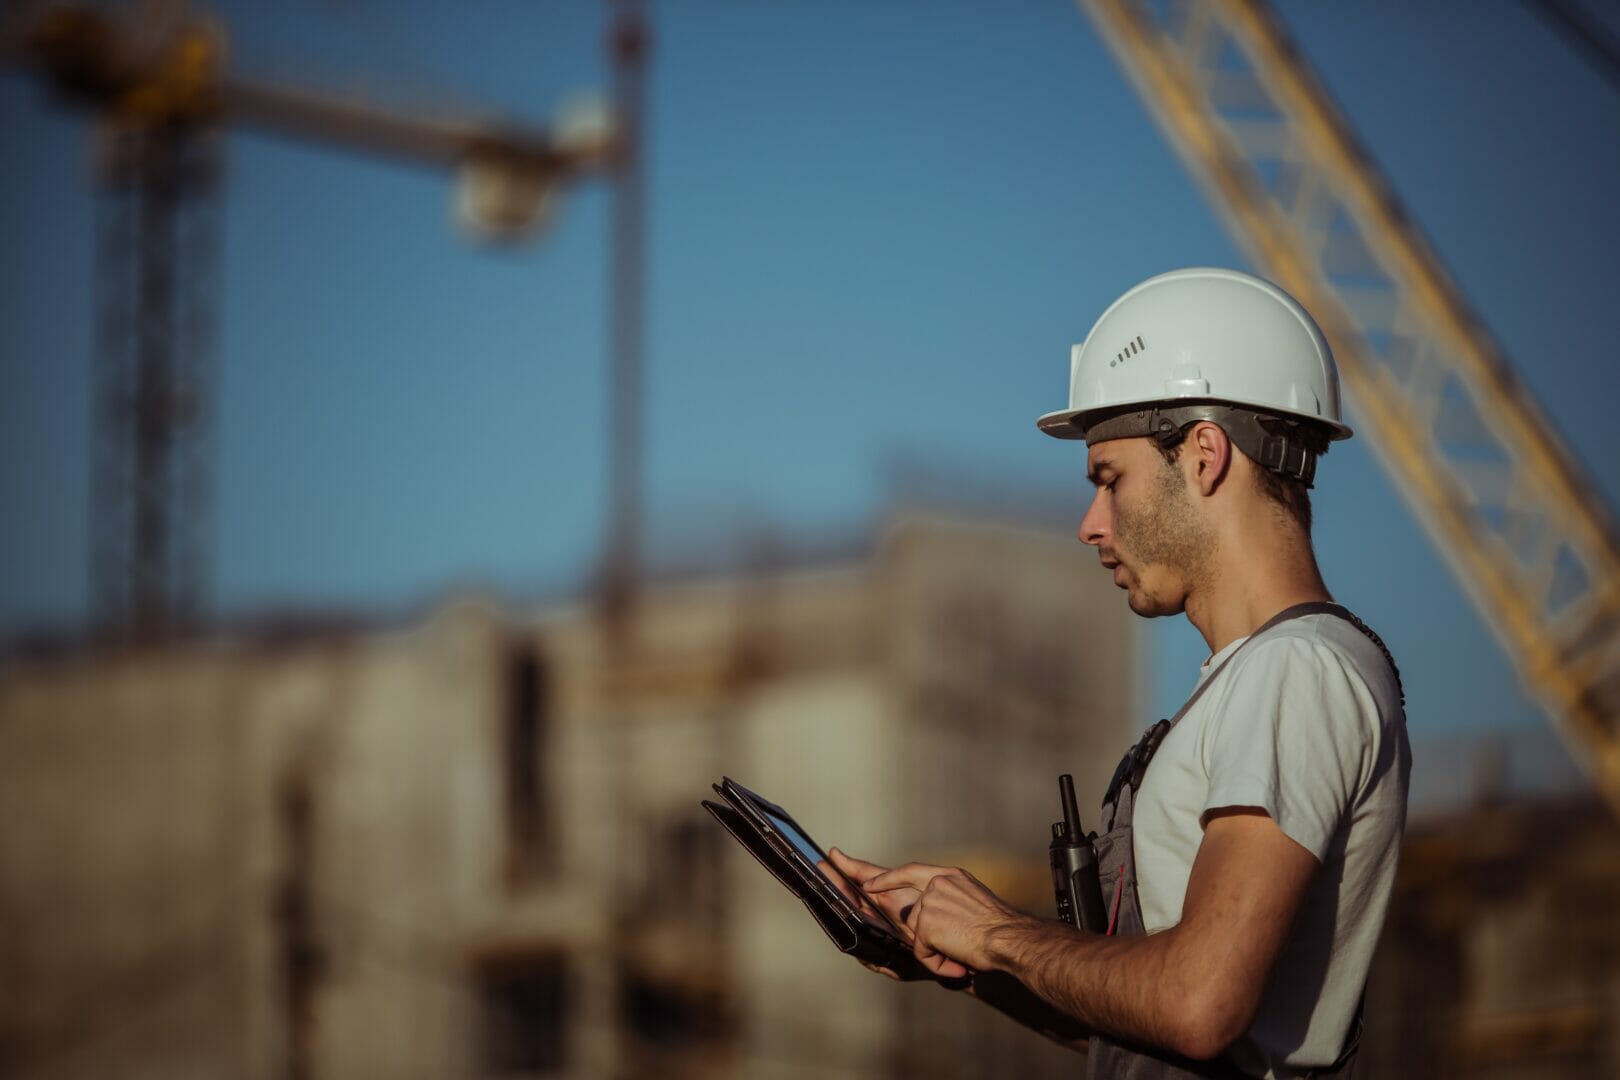 Construction sector turning to mobile solutions to boost productivity @WorkMobile